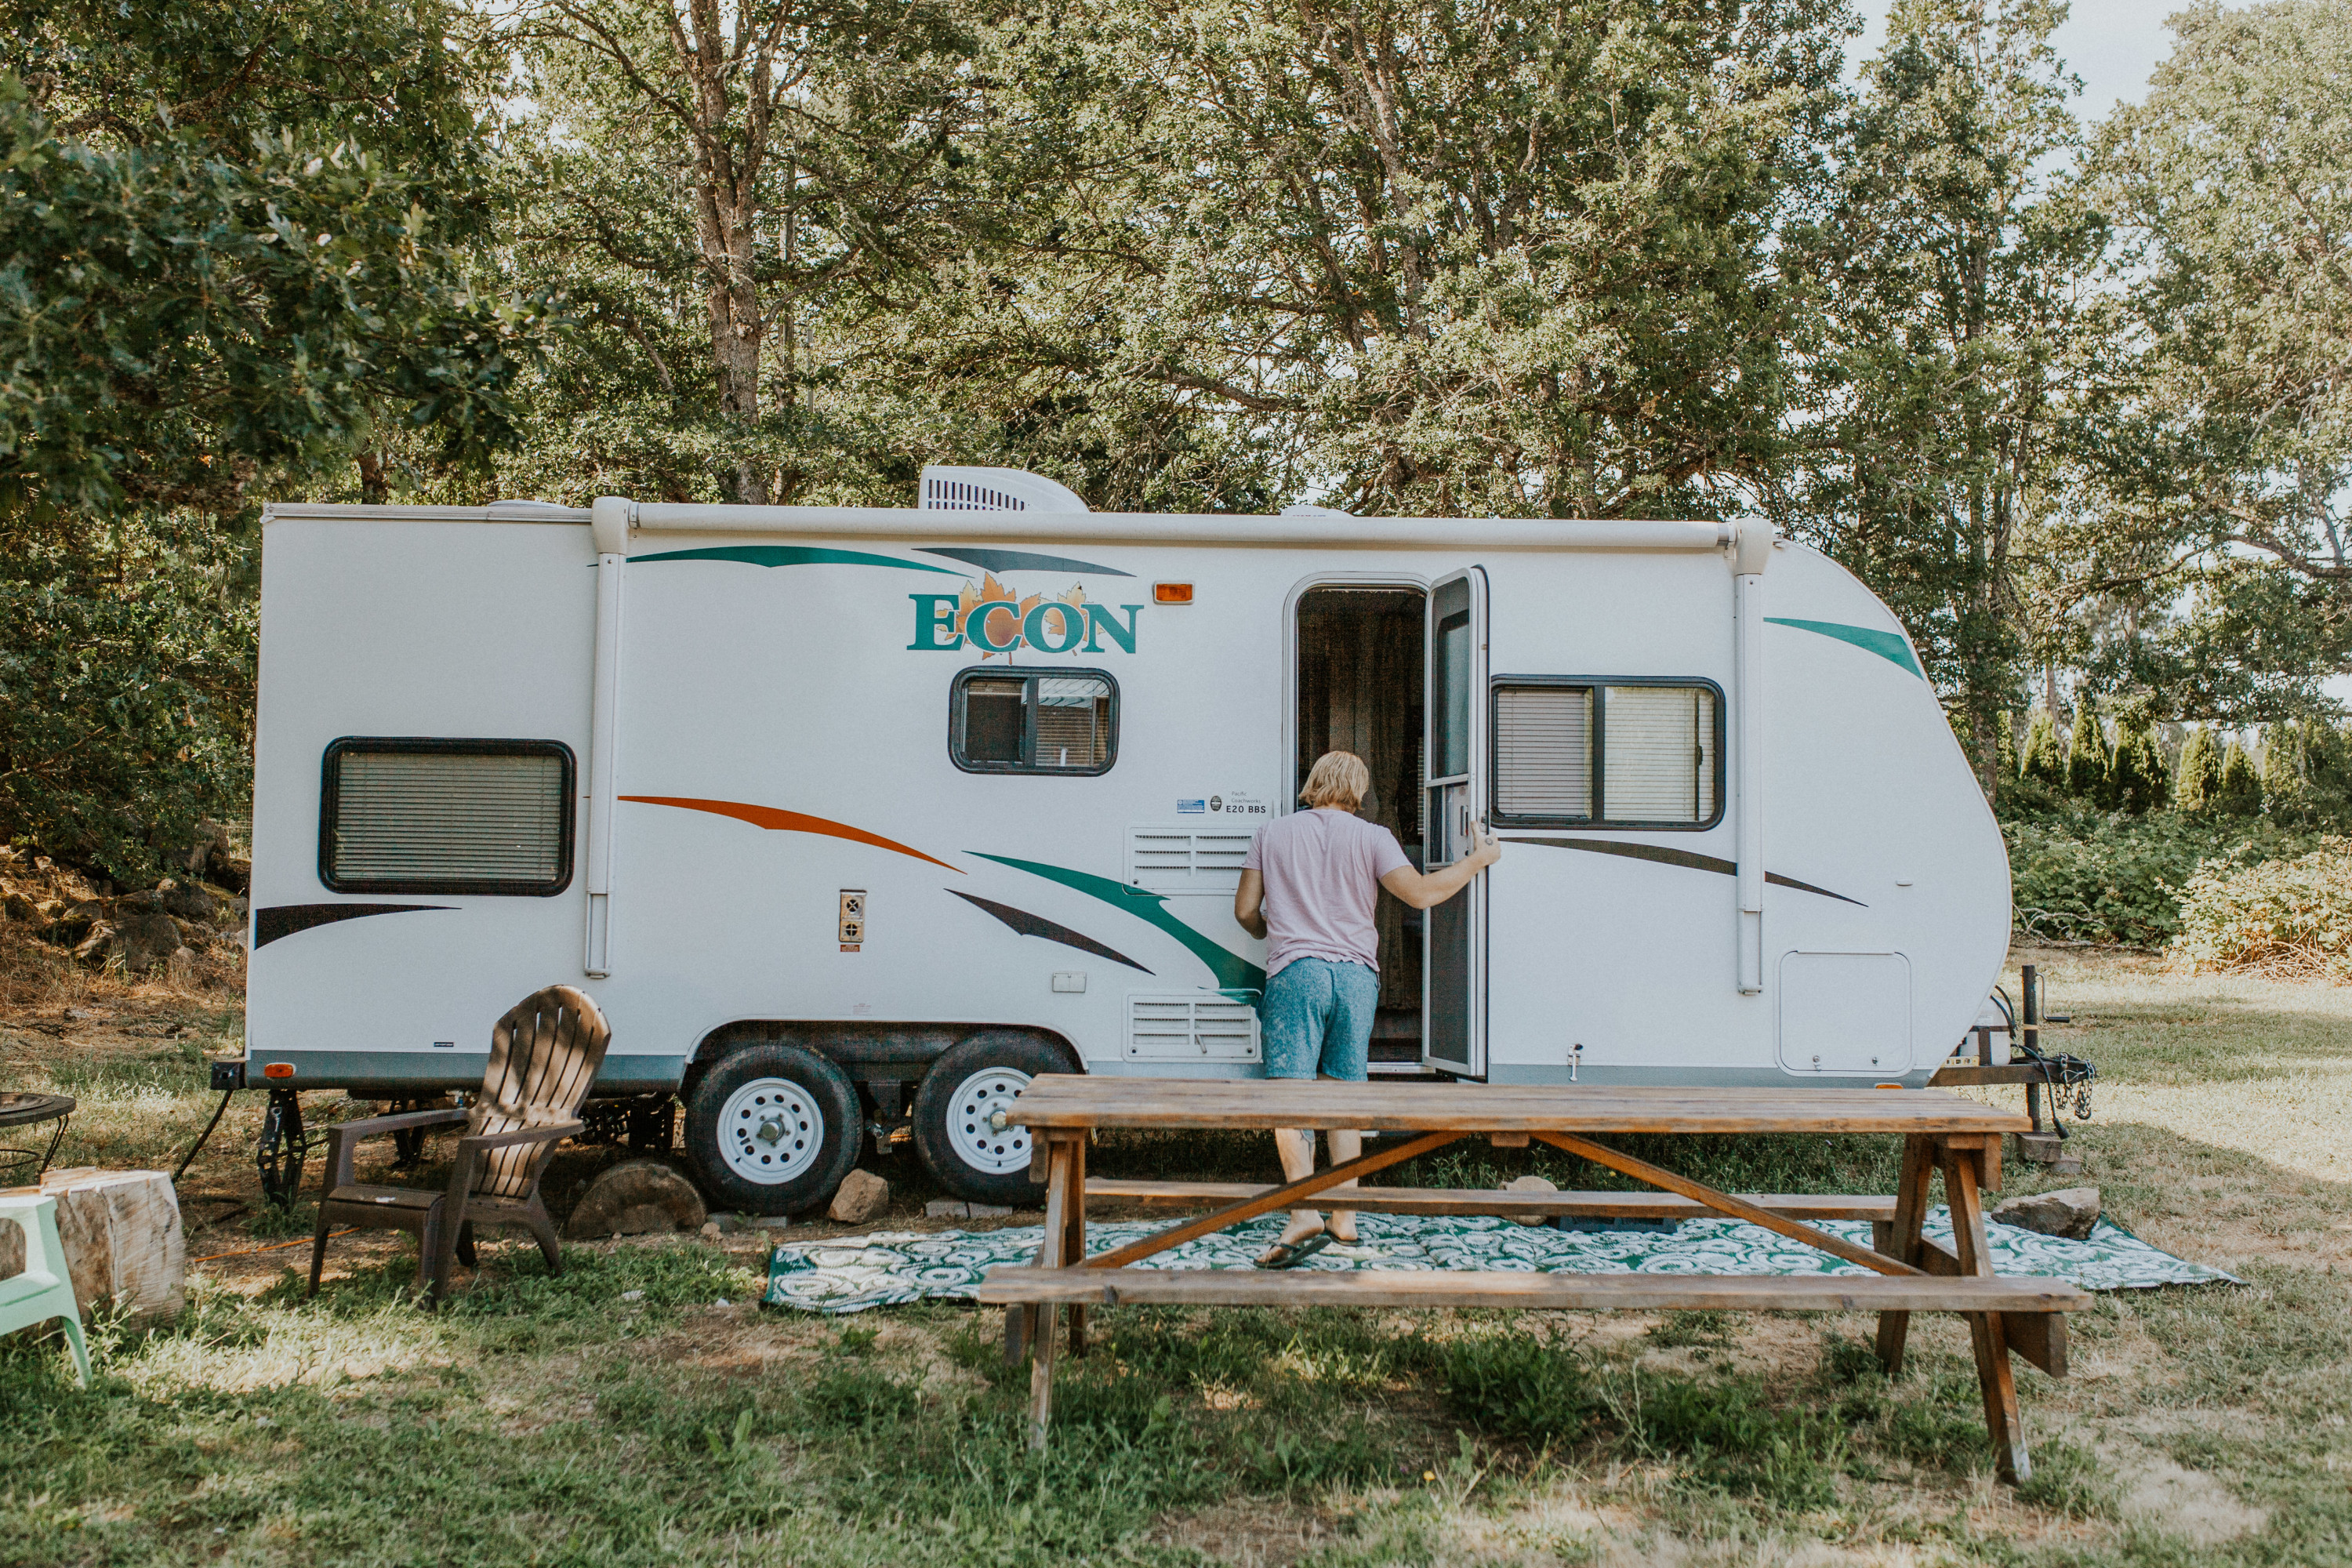 How To Build An Rv Park / The Truth About Year Round Rv Park Living Axleaddict - Sunset park rv helps you experience the pleasure of camping and being with friends, family, and the outdoors.